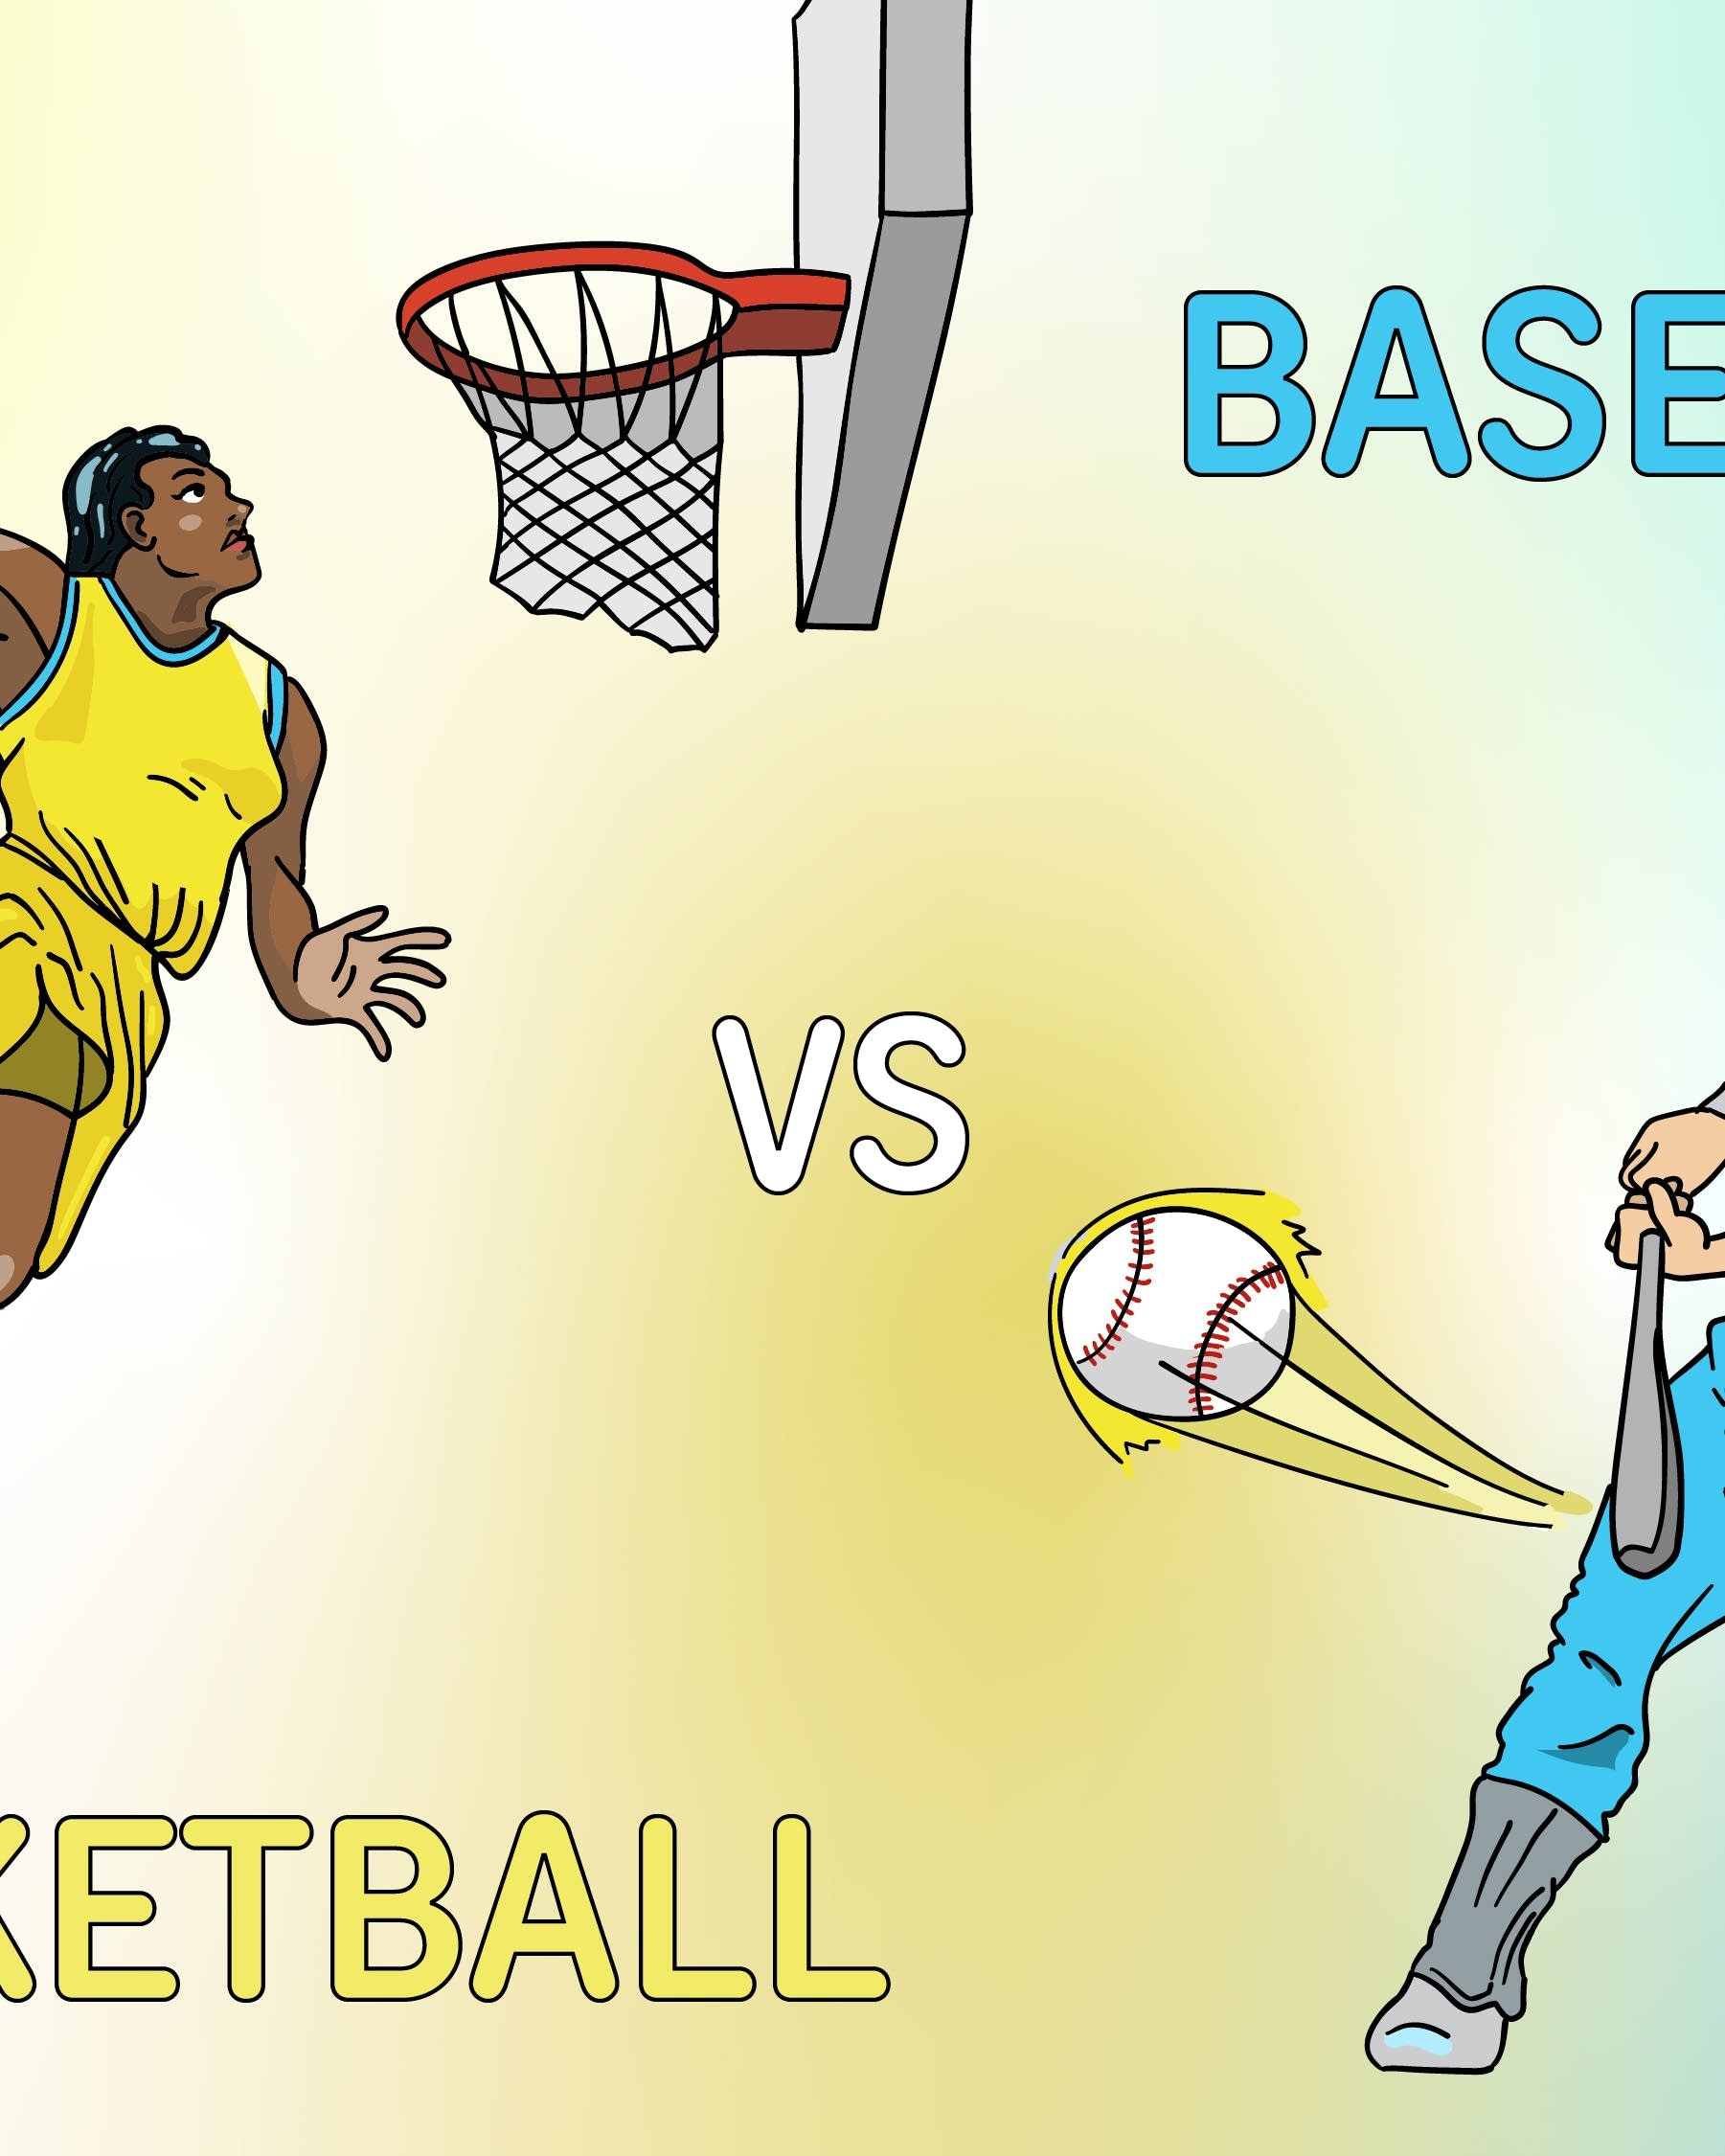 What is the Difference between Basketball And Baseball?